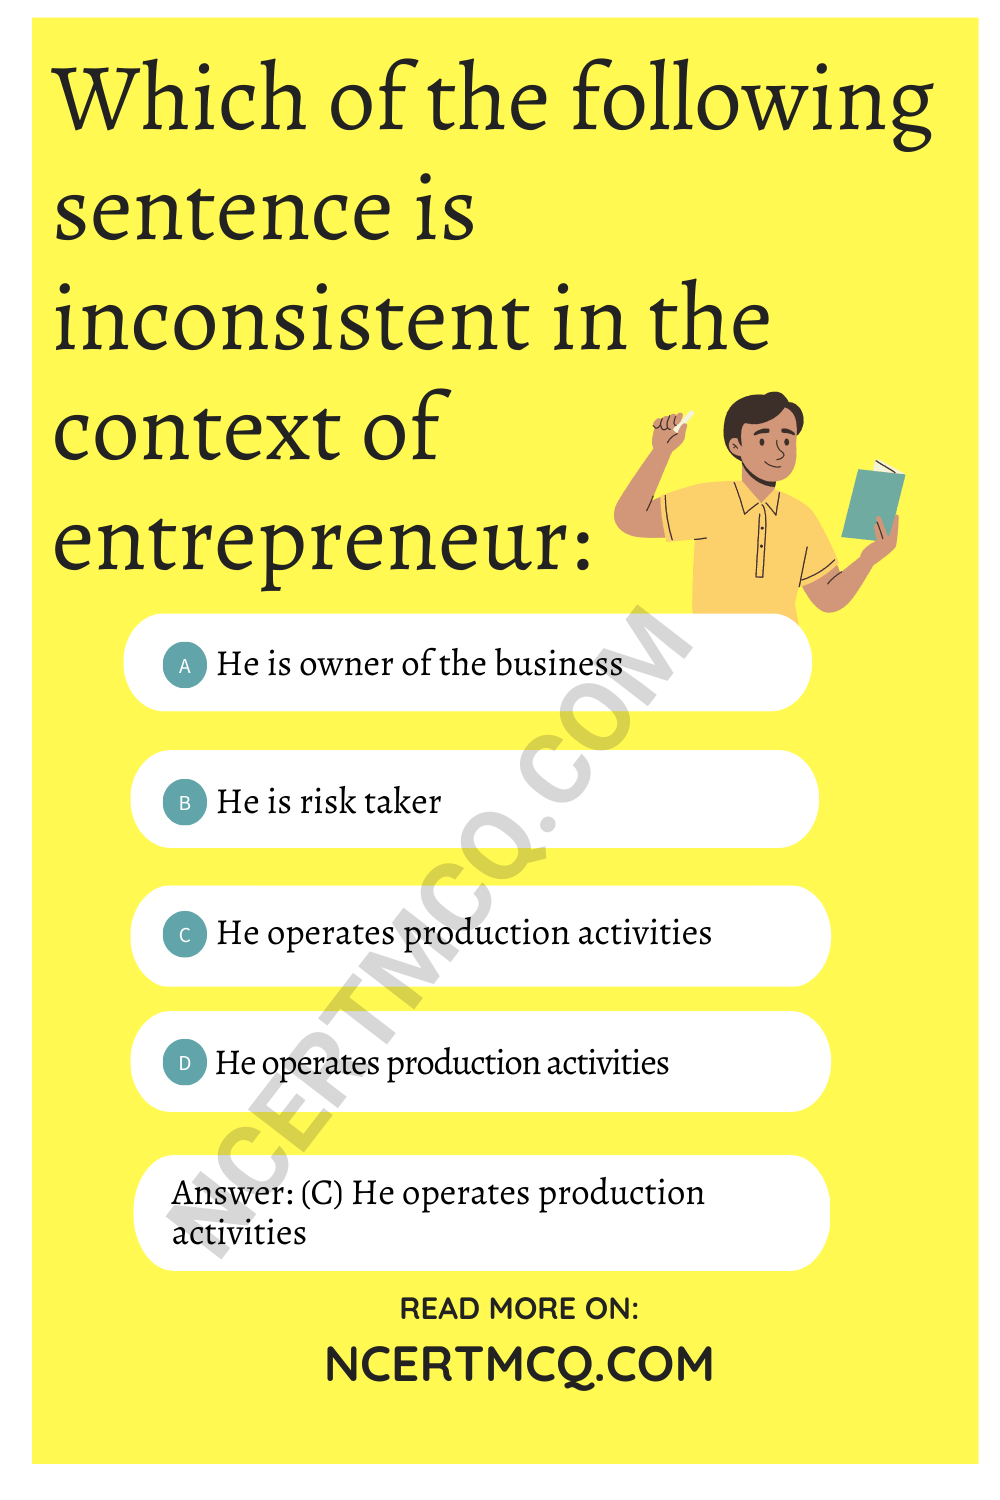 Which of the following sentence is inconsistent in the context of entrepreneur: